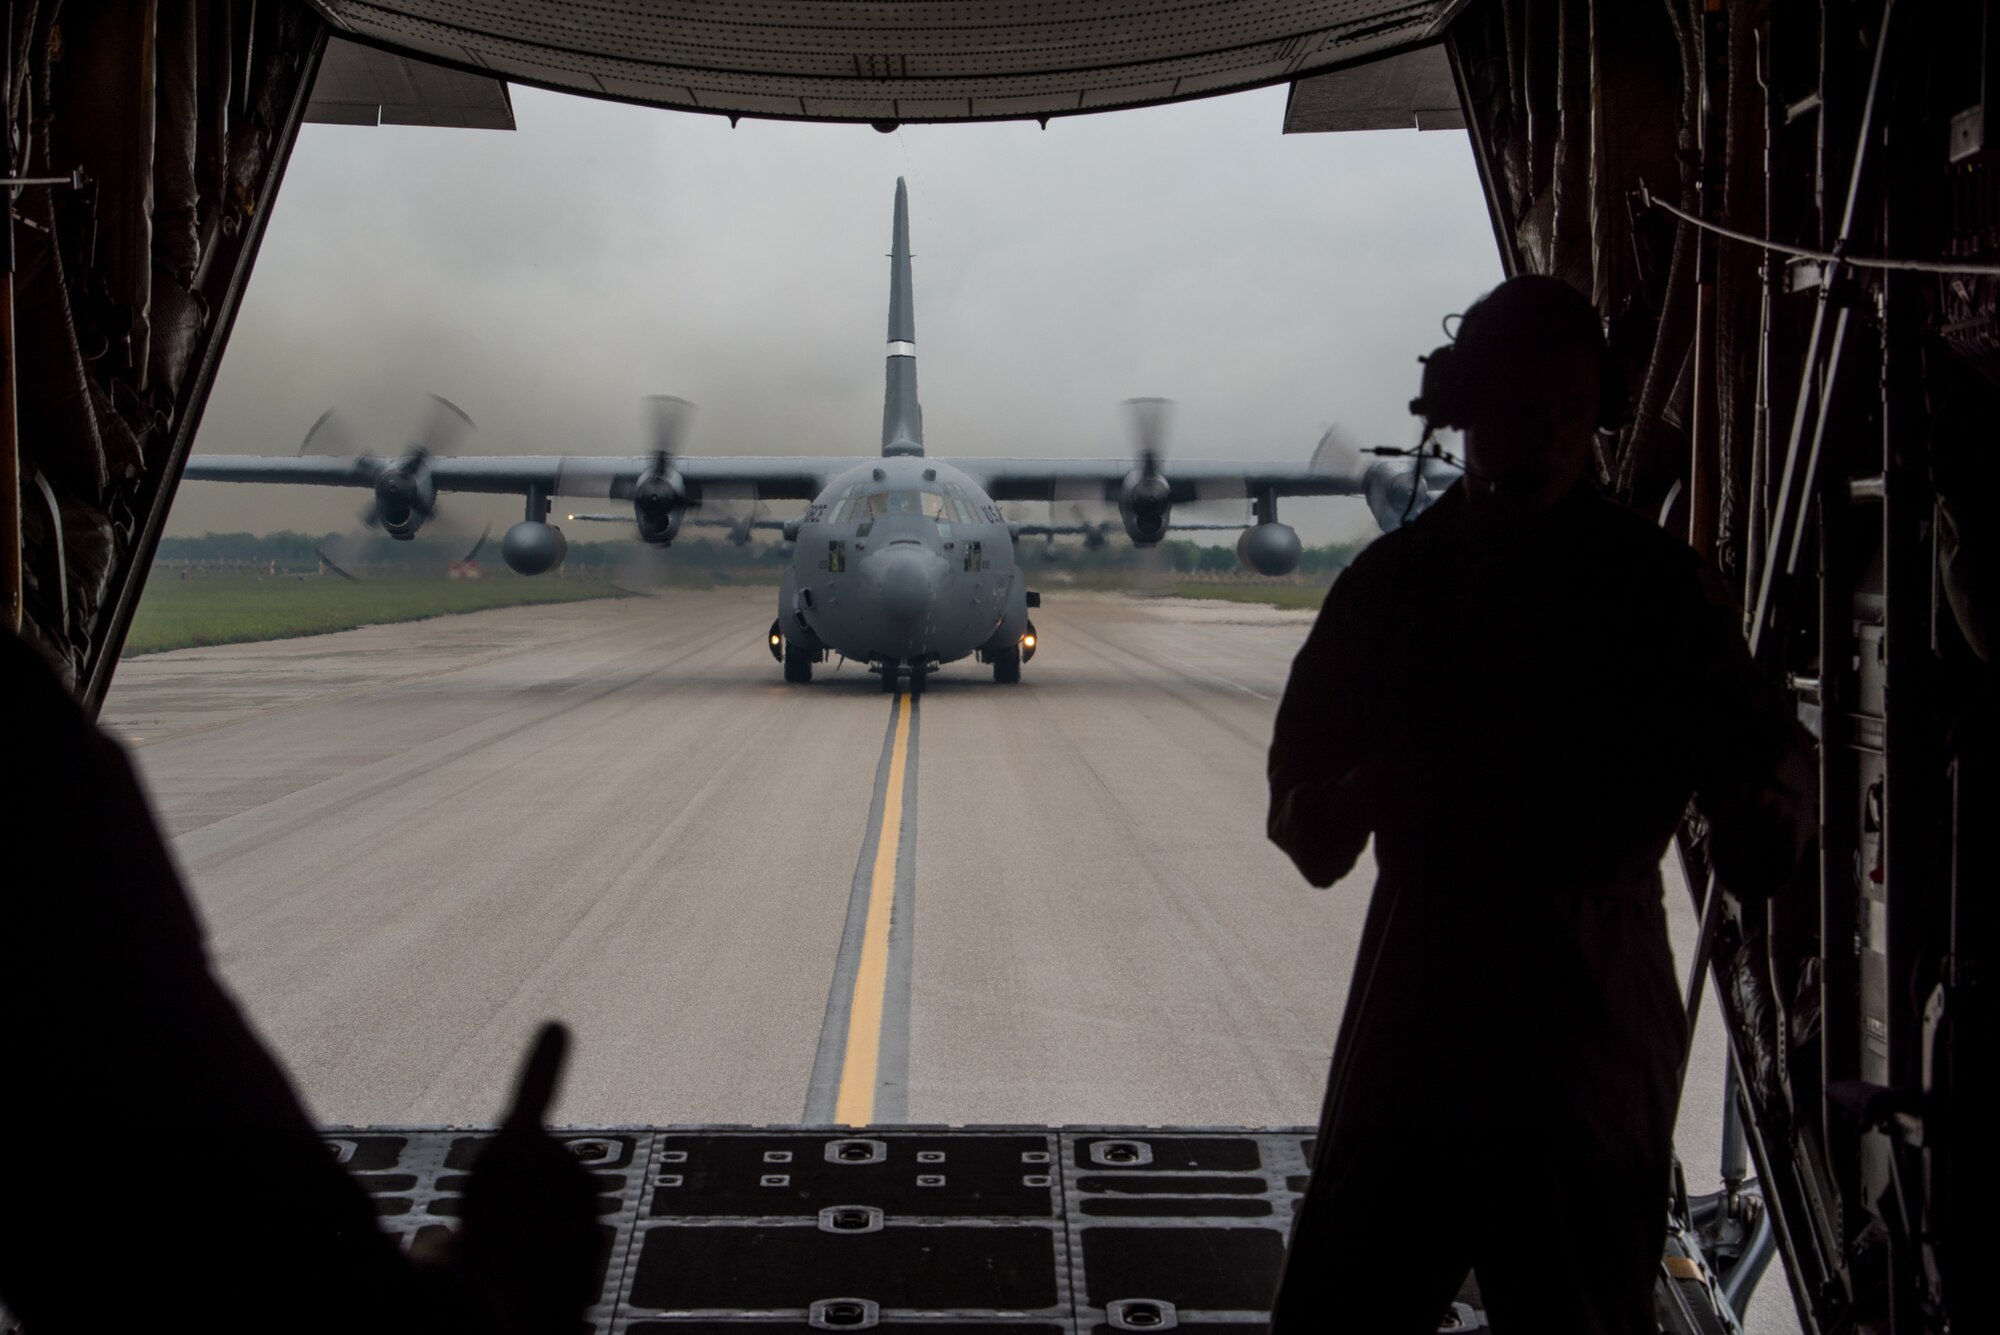 A Kentucky Air National Guard C-130 Hercules aircraft lands at Aviano Air Base, Italy, on May 20, 2019, after conducting a nonstandard-load training flight while carrying equipment from U.S. Army Europe’s 173rd Airborne Brigade Combat Team as part of Immediate Response 2019. The exercise is designed to improve readiness and interoperability among participating allied and partner nations integrated into a multinational battalion. Combined training enables partners to readily respond more effectively to regional crises and meet their own national defense goals. (U.S. Air National Guard photo by Staff Sgt. Horton)